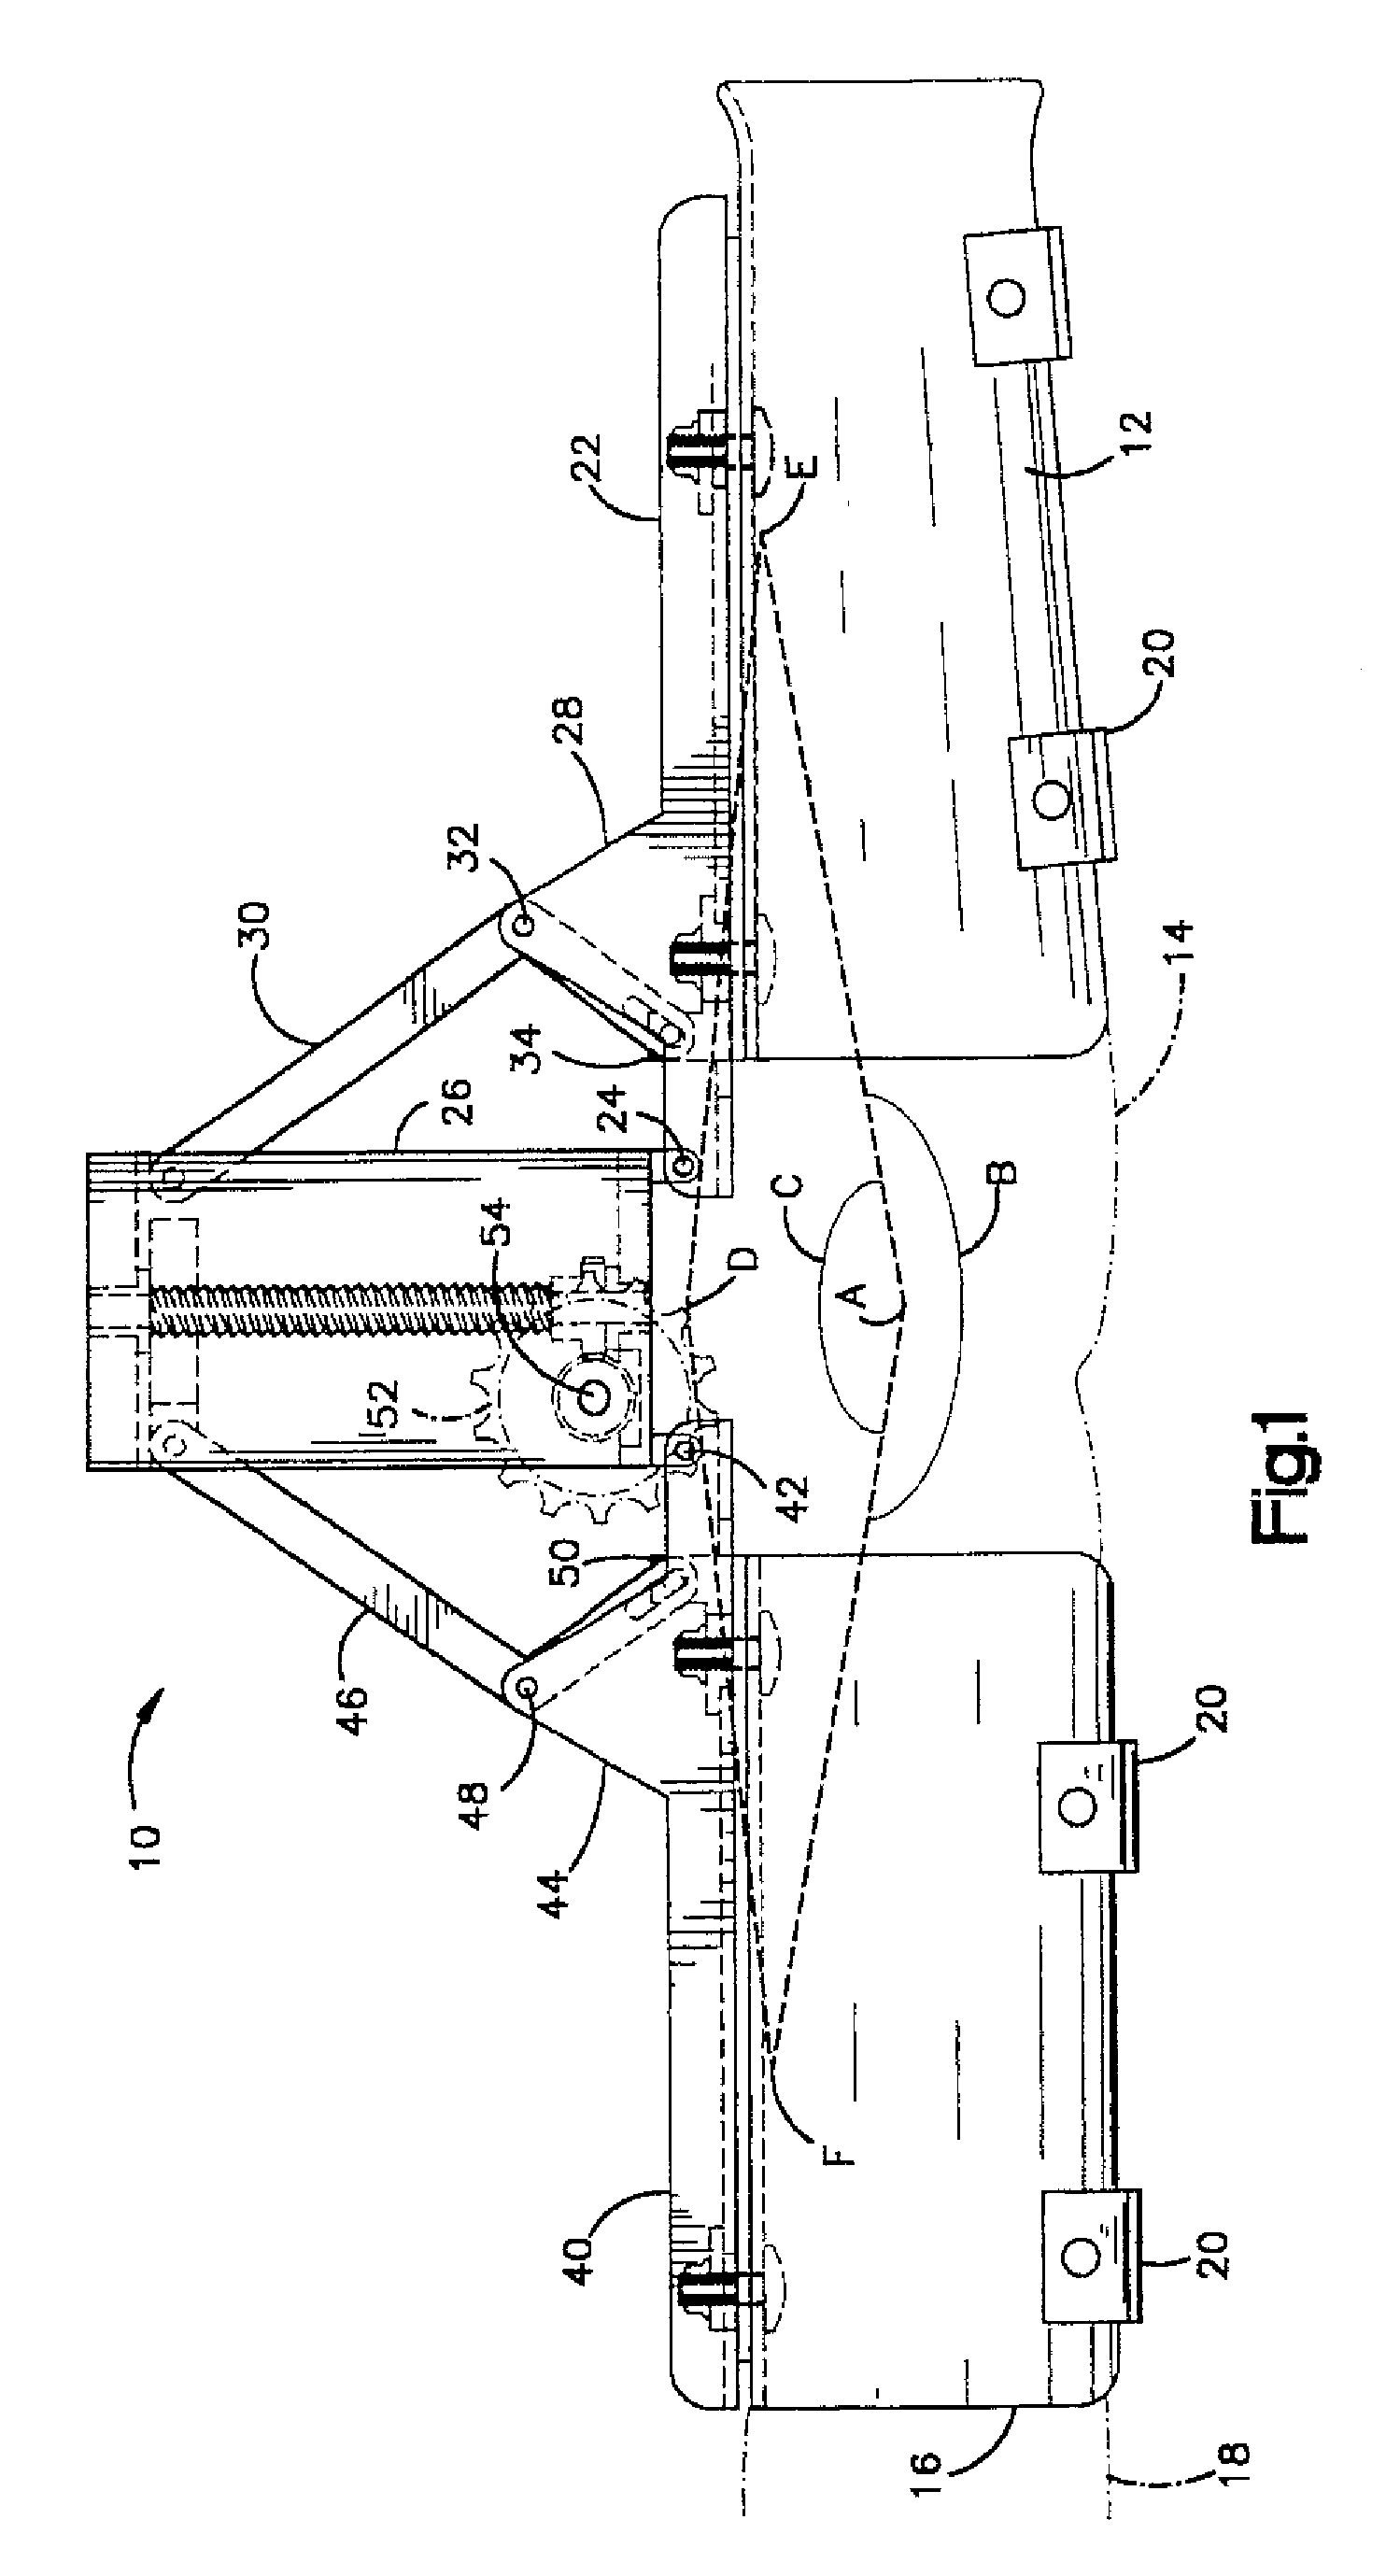 Patient monitoring apparatus and method for orthosis and other devices